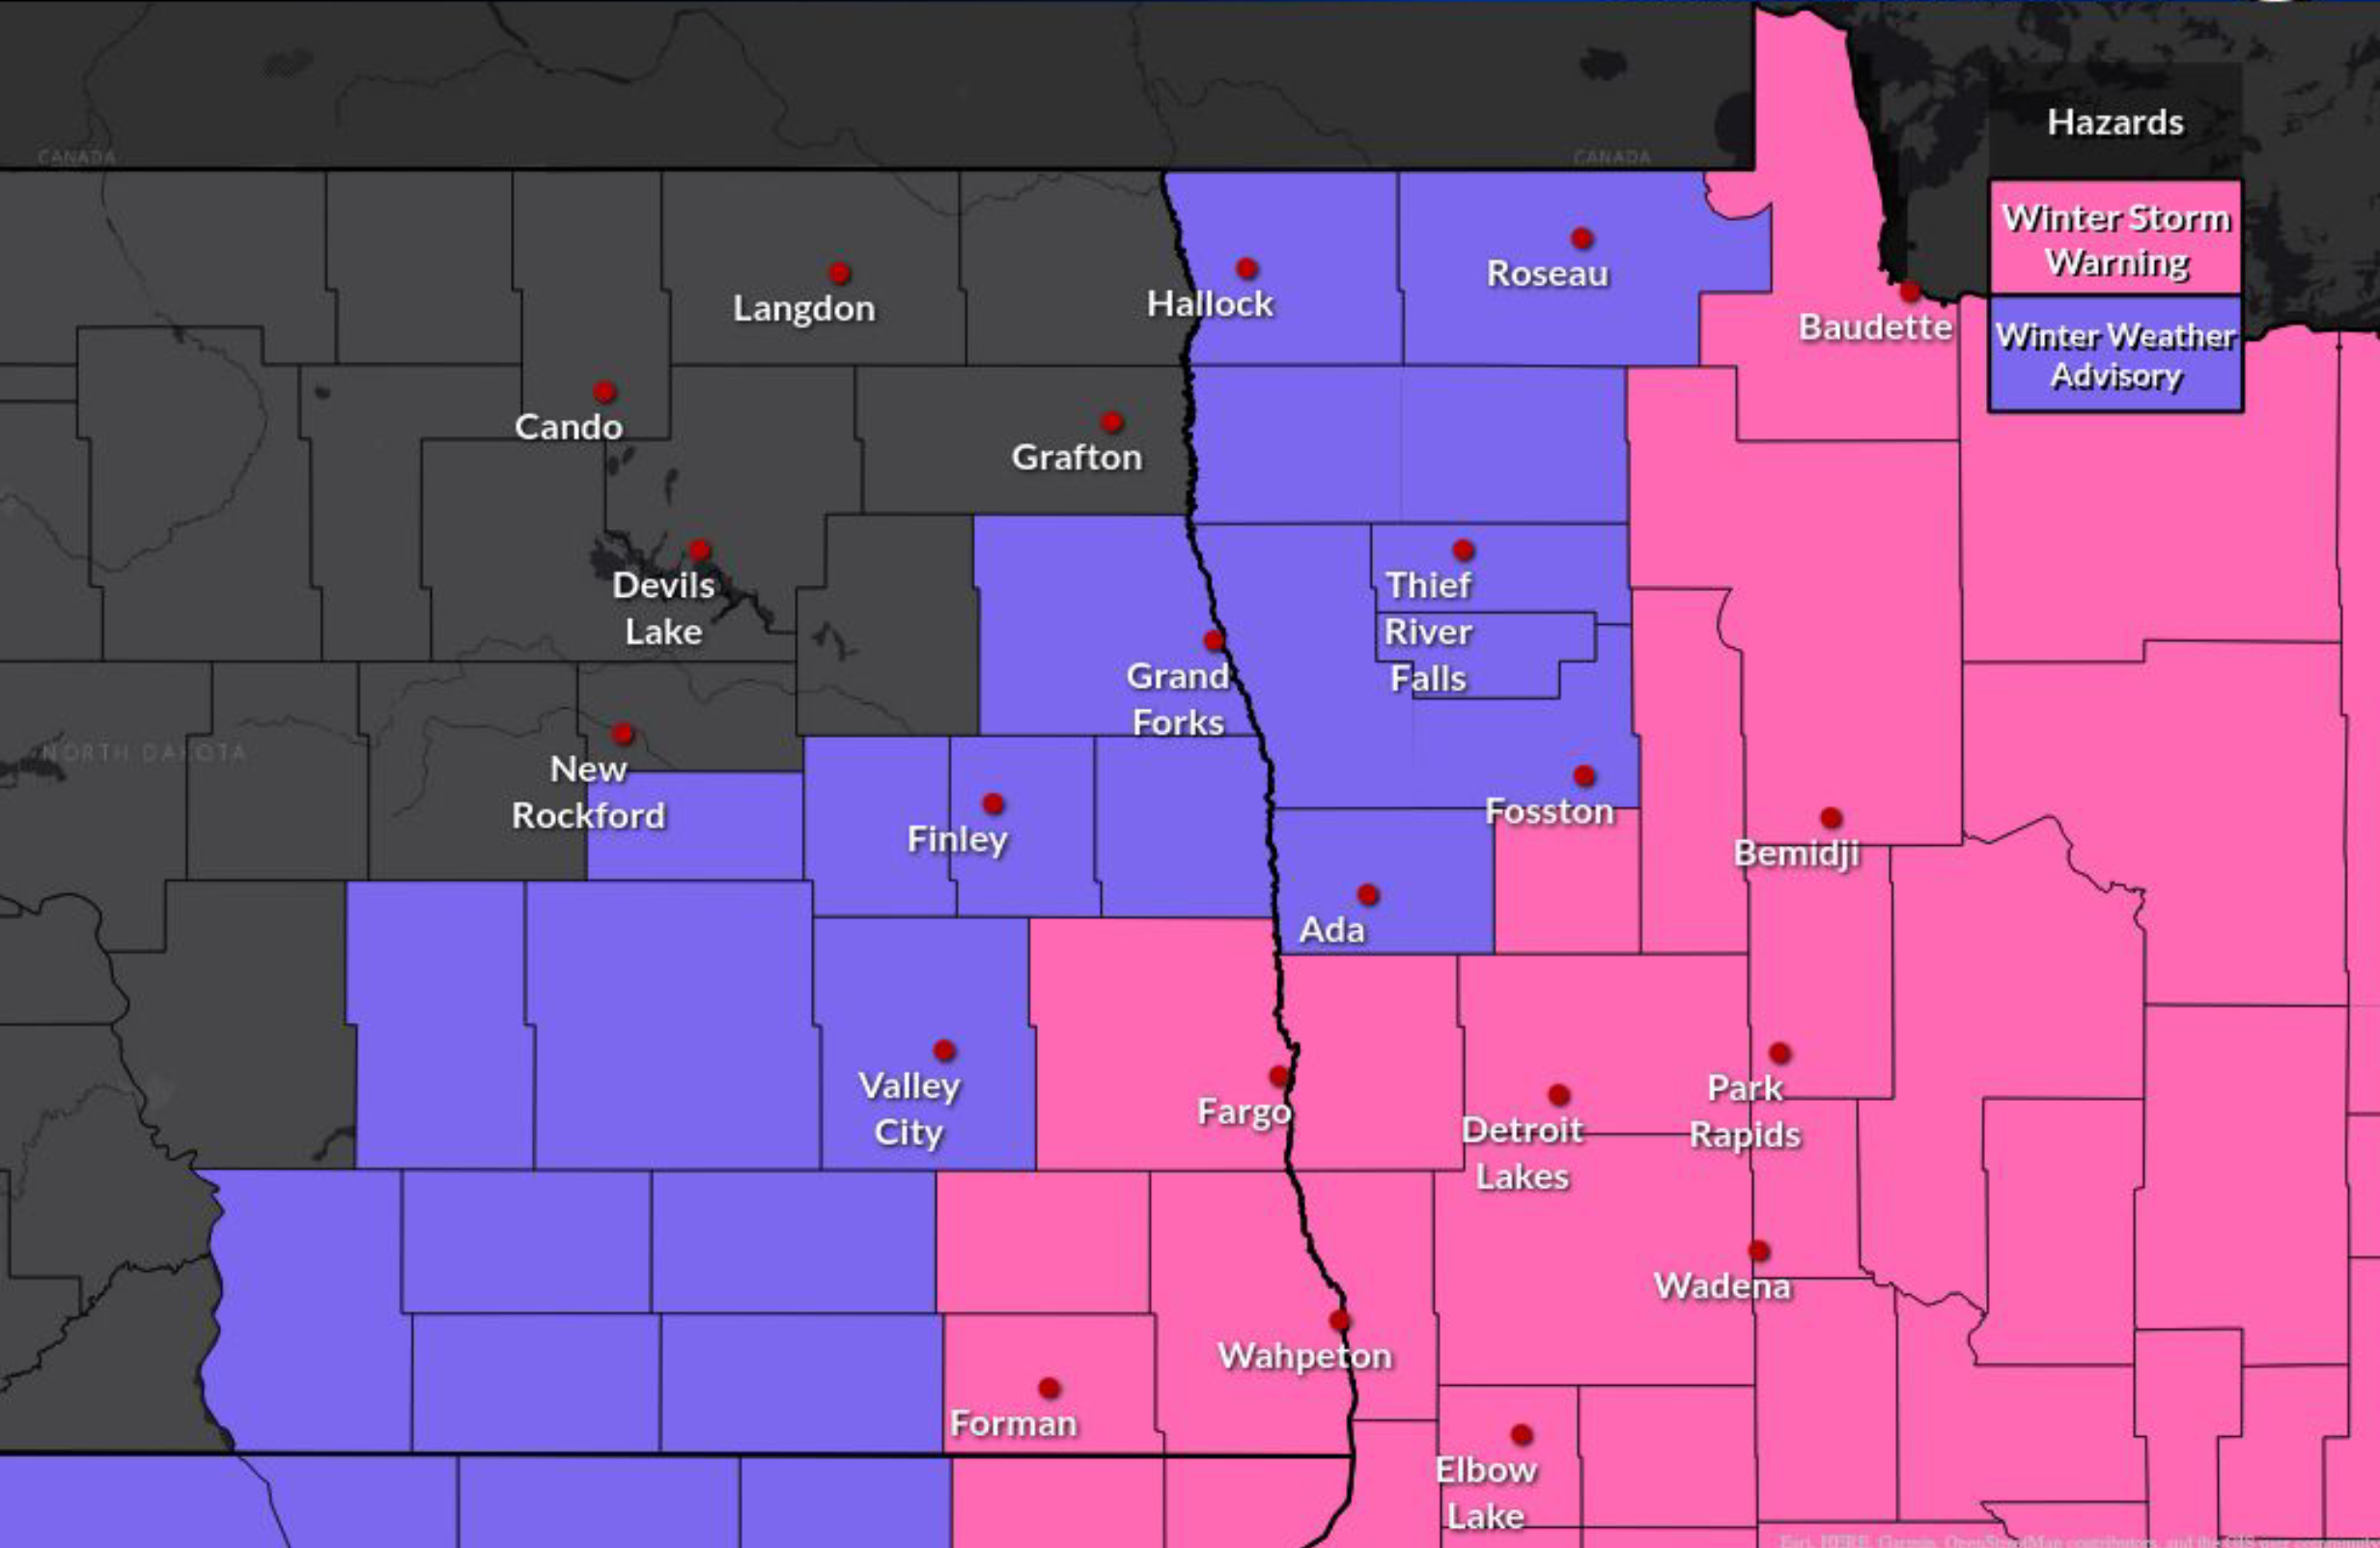 Hazard map showing warnings/advisories morning of March 25th.